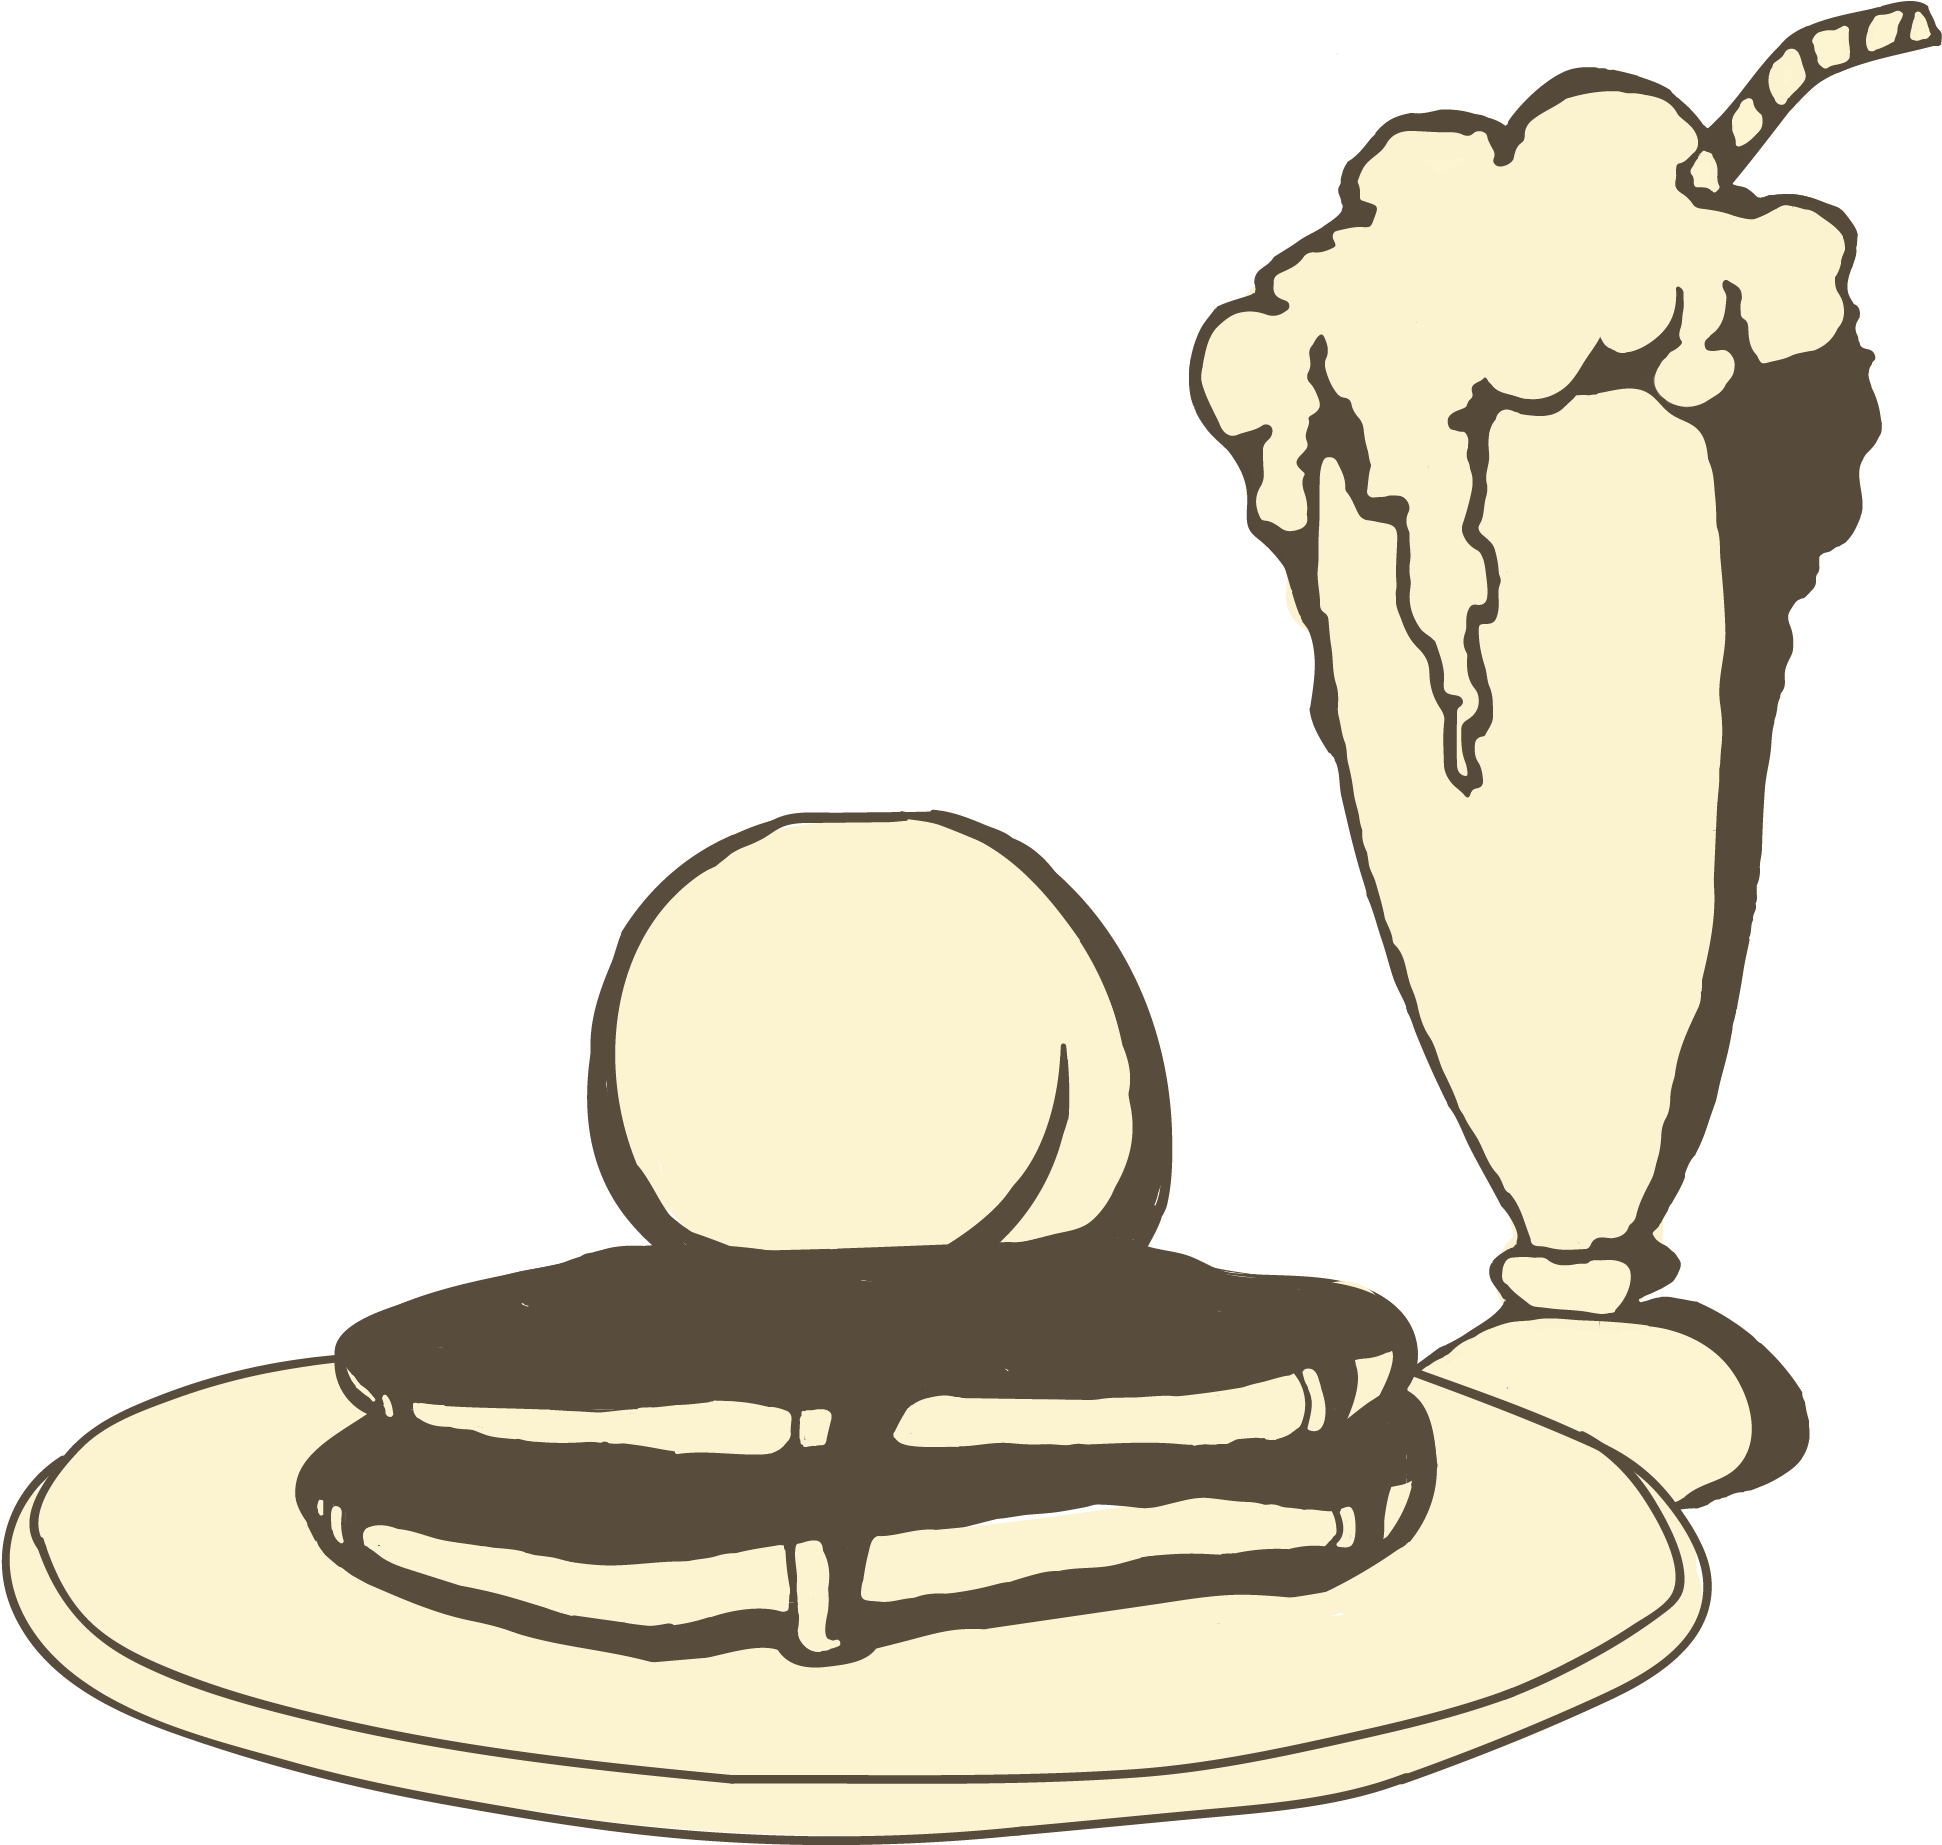 A Plate Of Pancakes And A Milkshake